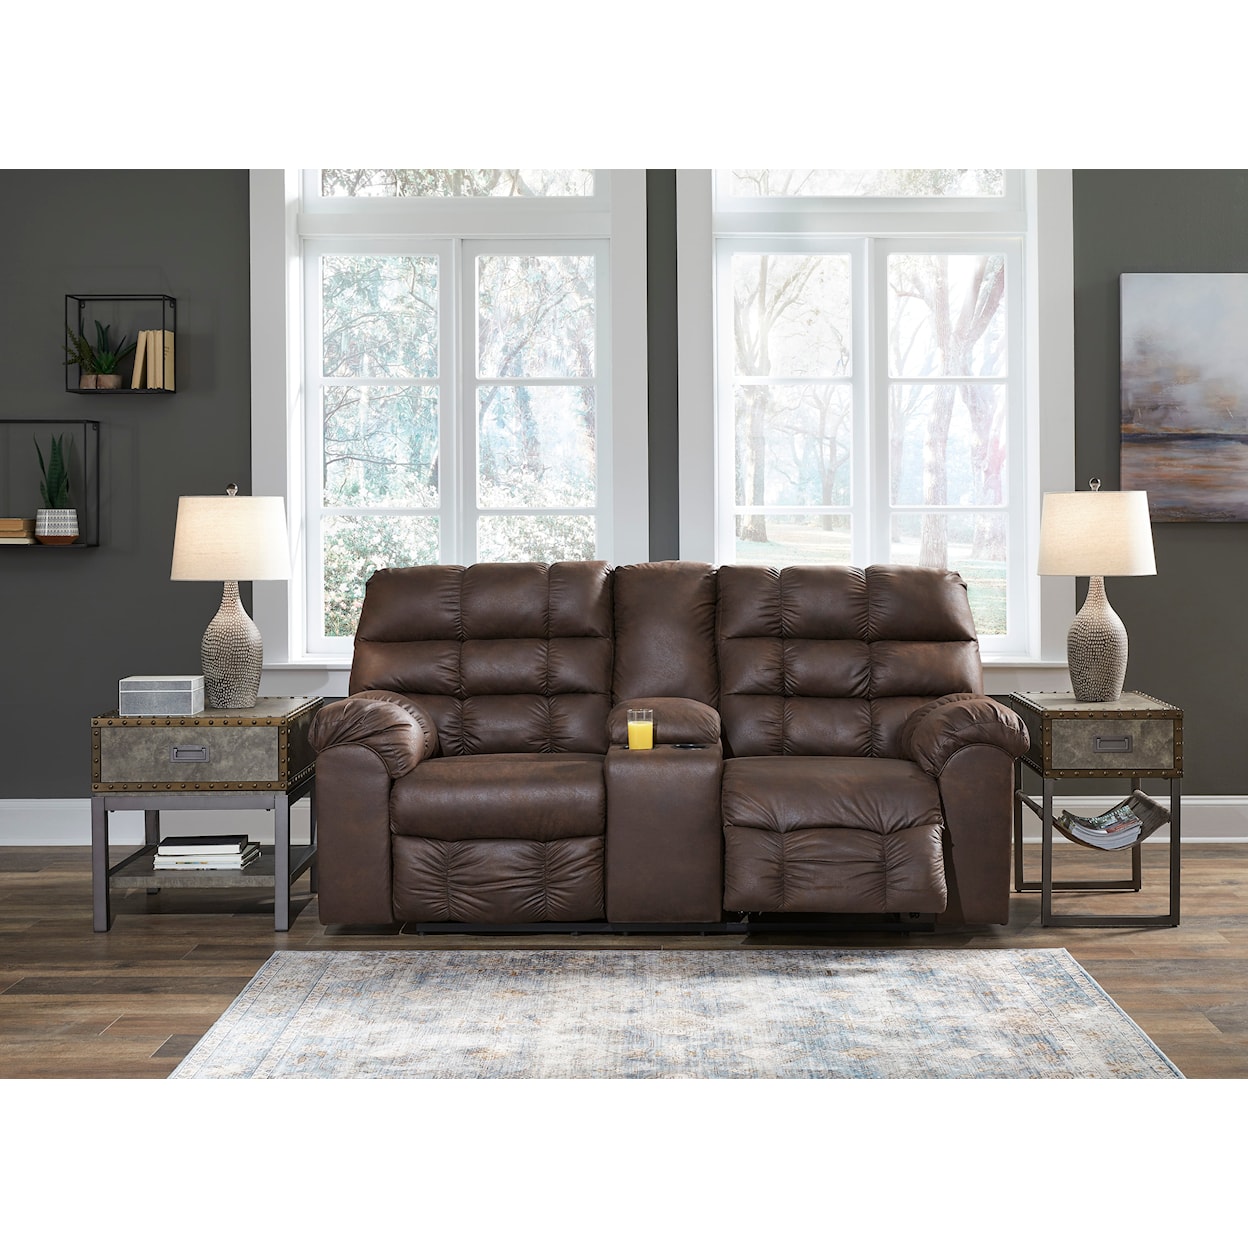 Signature Design by Ashley Derwin Reclining Loveseat with Console